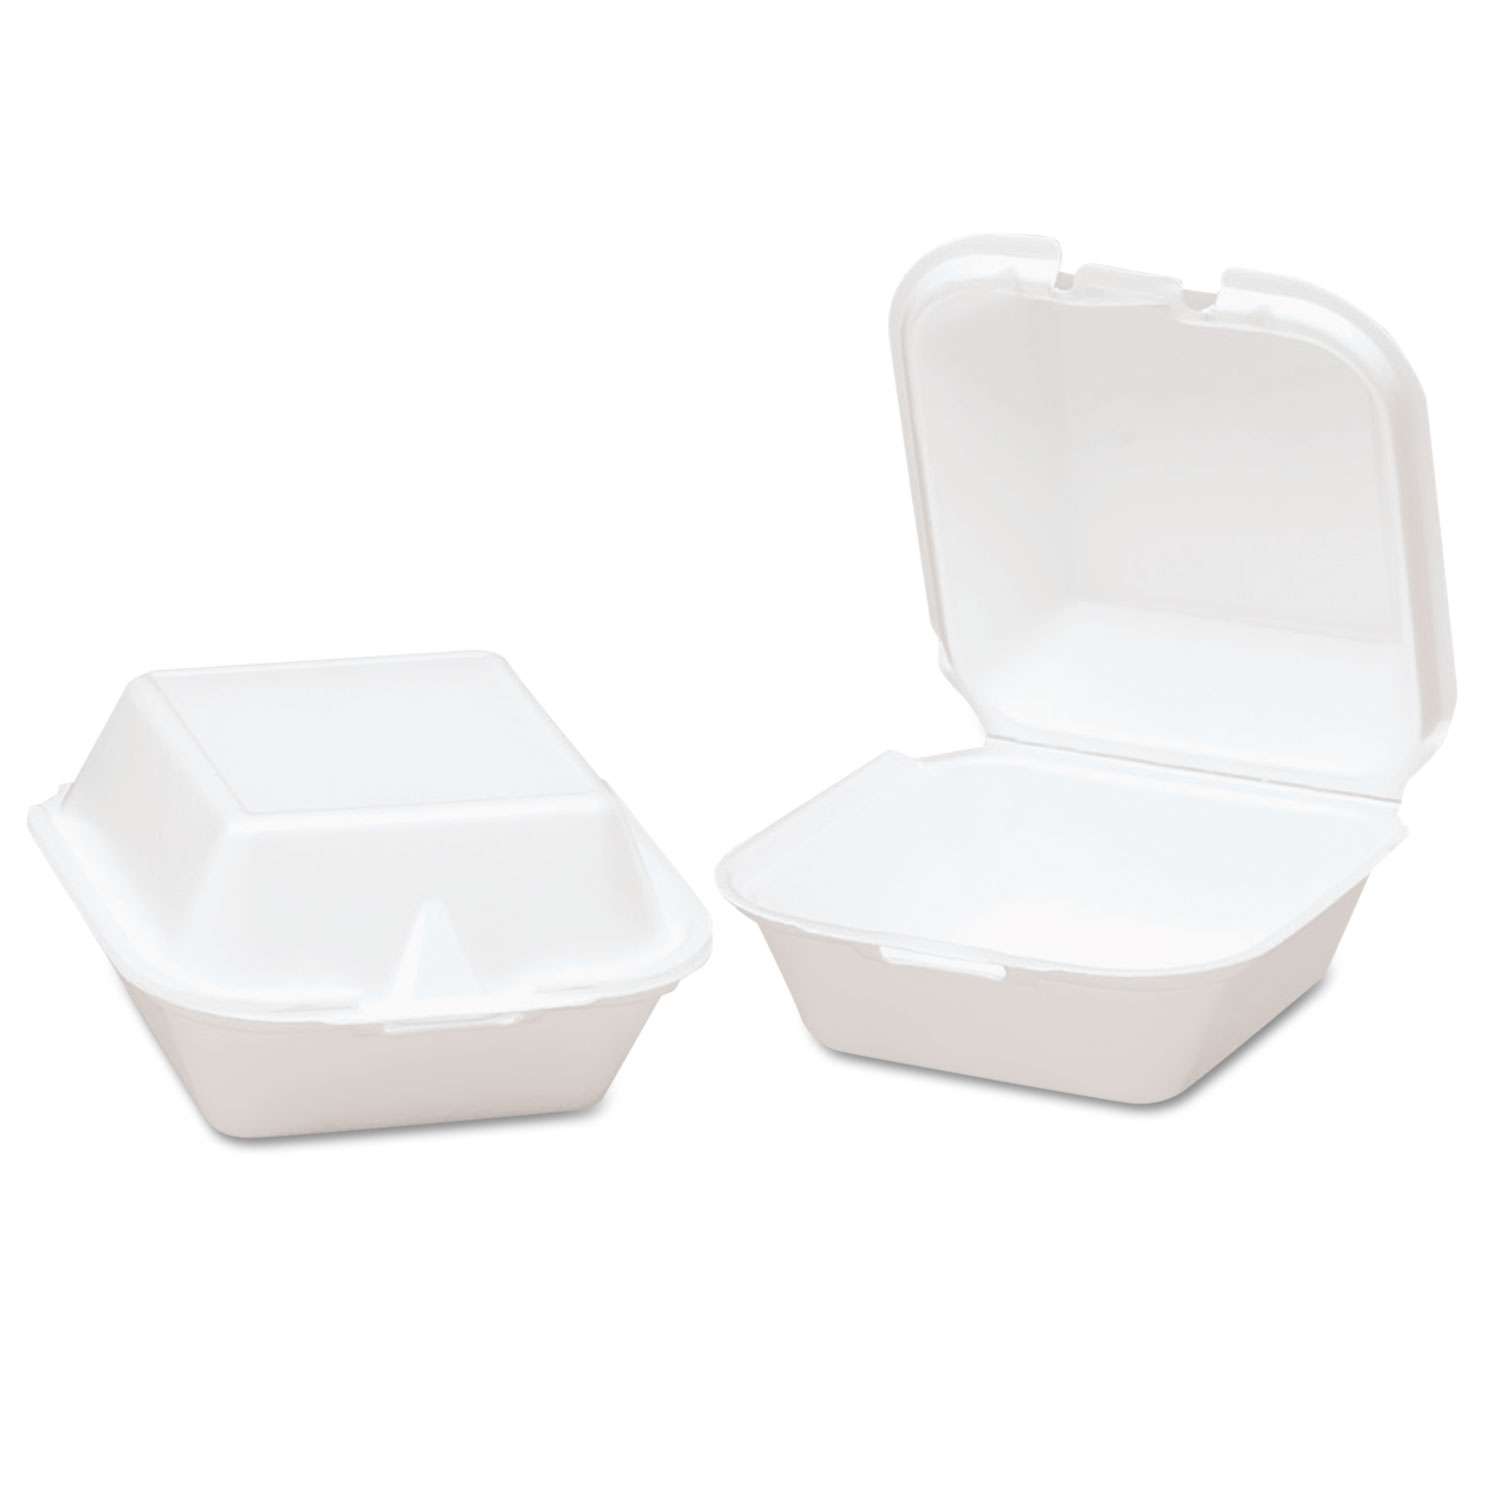 Snap-It Foam Hinged Sandwich Container, 5-4/5x5-2/3x3-1/8, White, 125/Bag, 4/CT